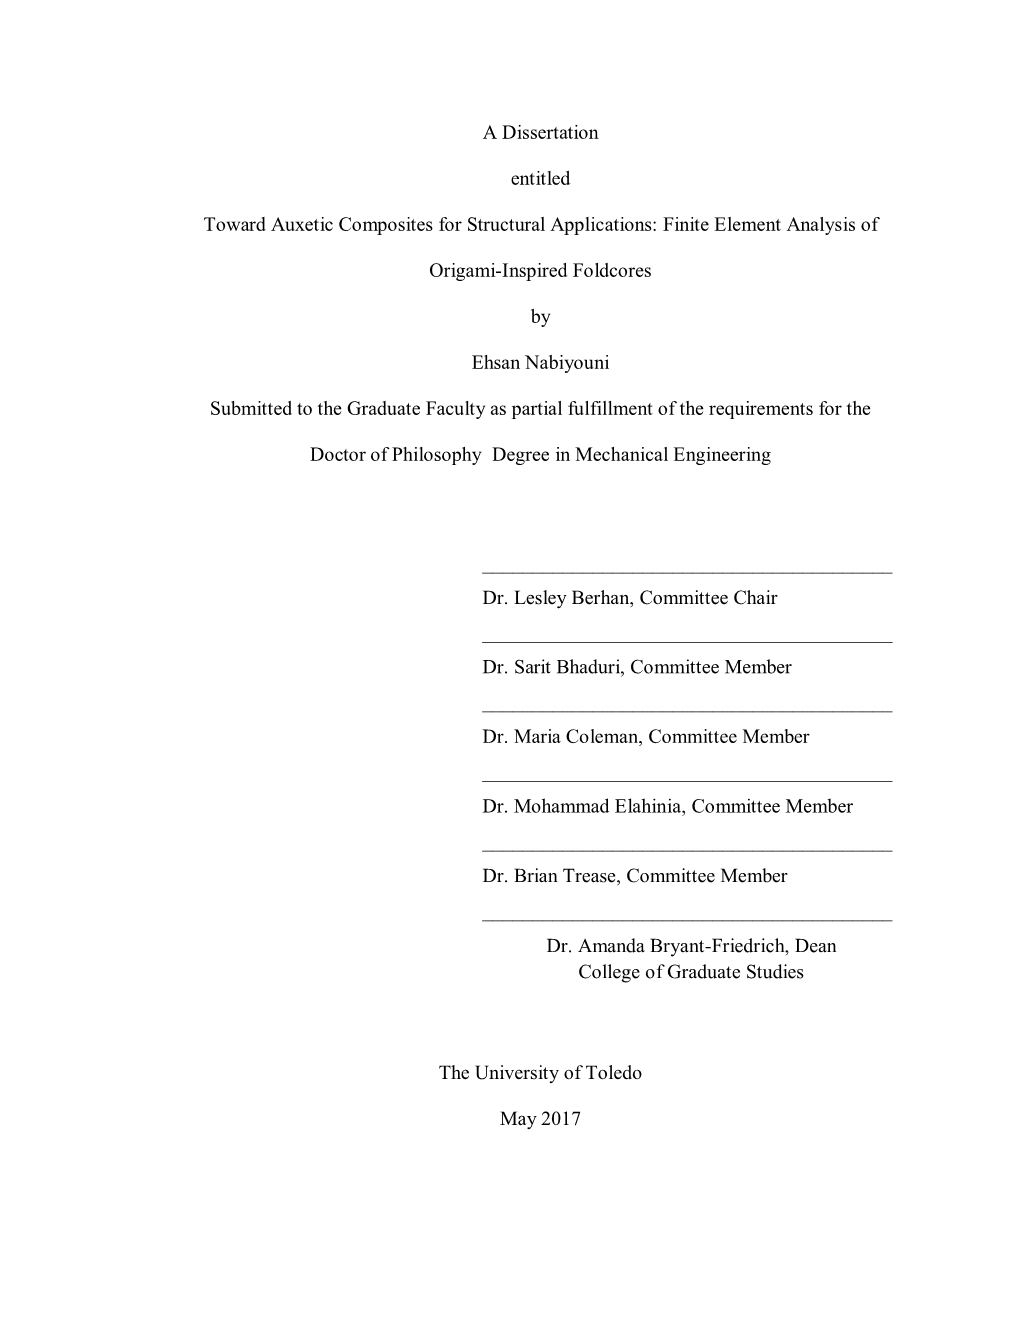 A Dissertation Entitled Toward Auxetic Composites for Structural